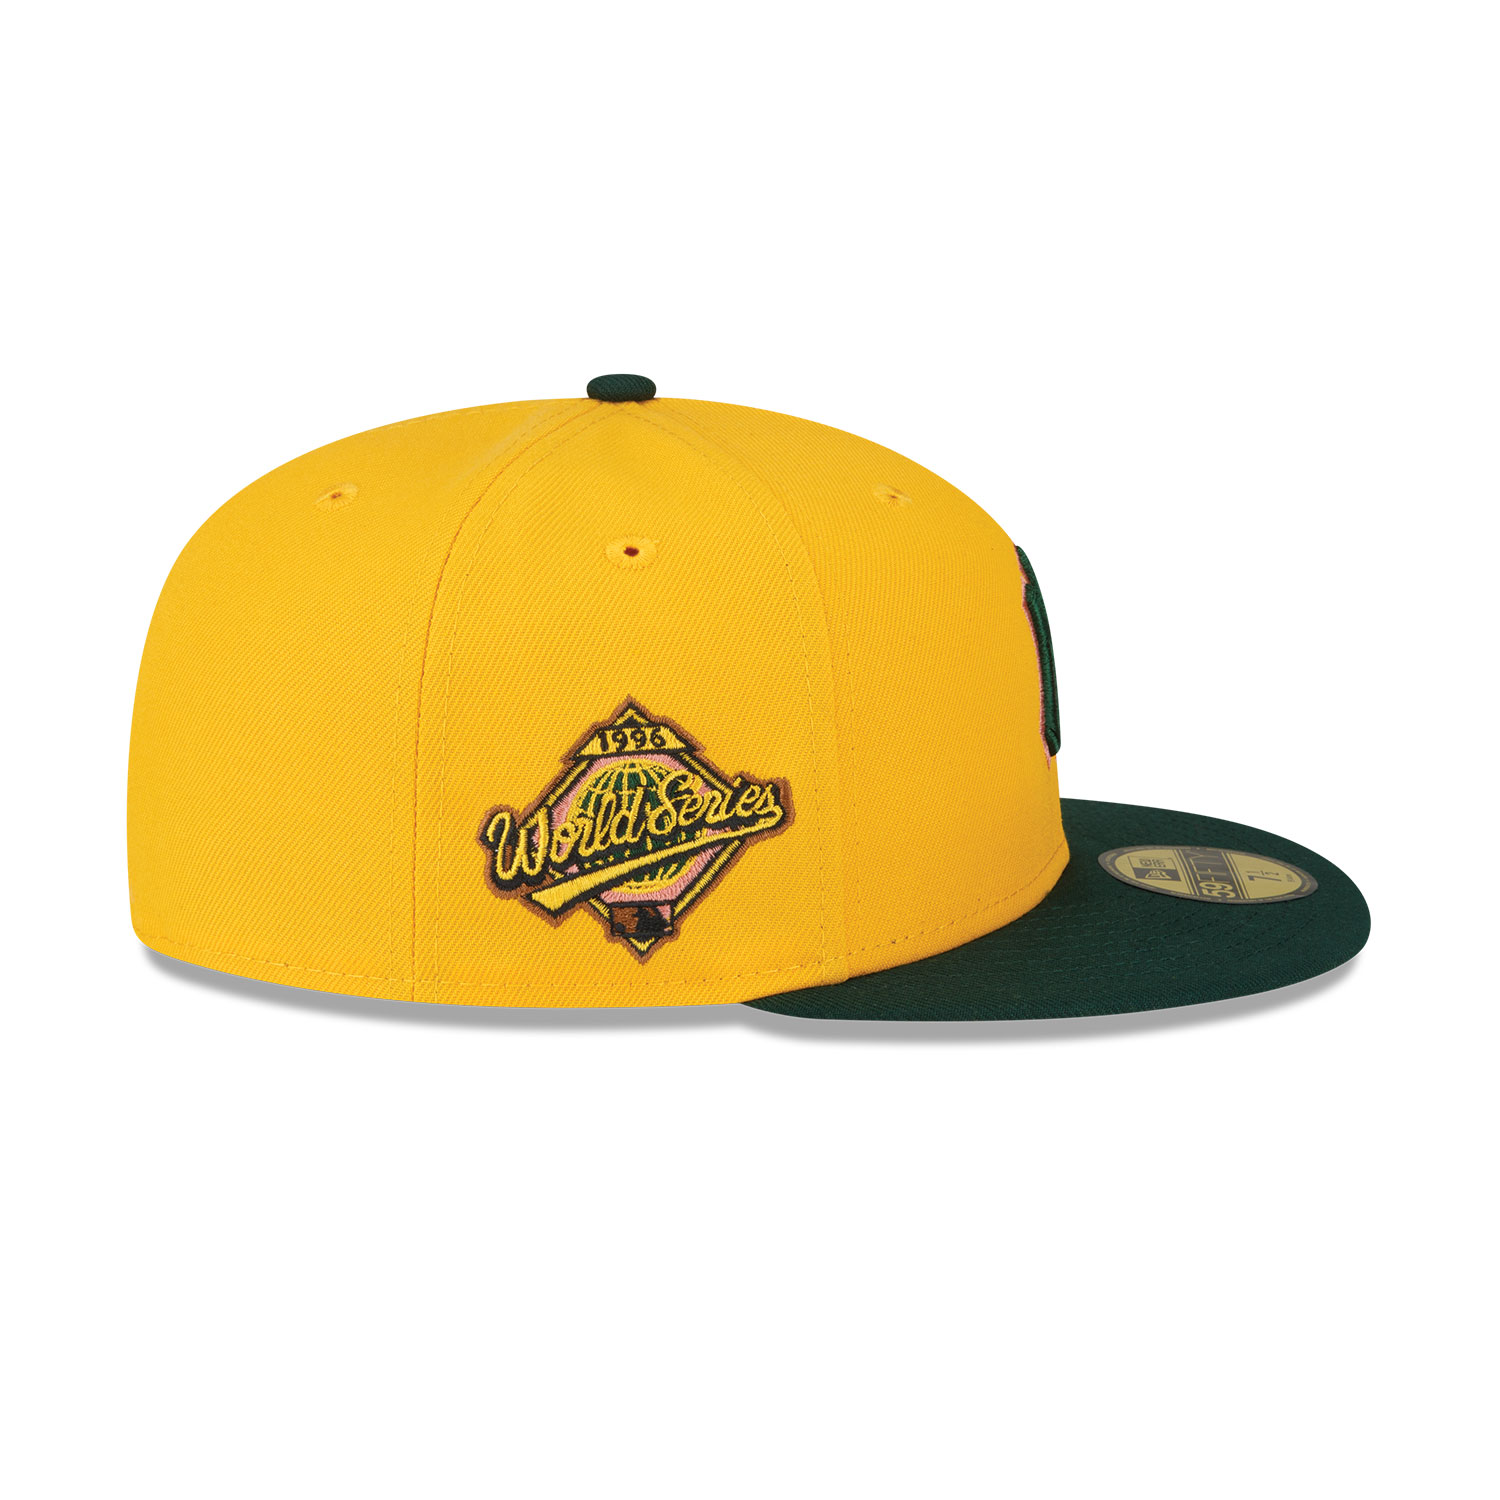 New York Yankees Back to School Yellow 59FIFTY Fitted Cap